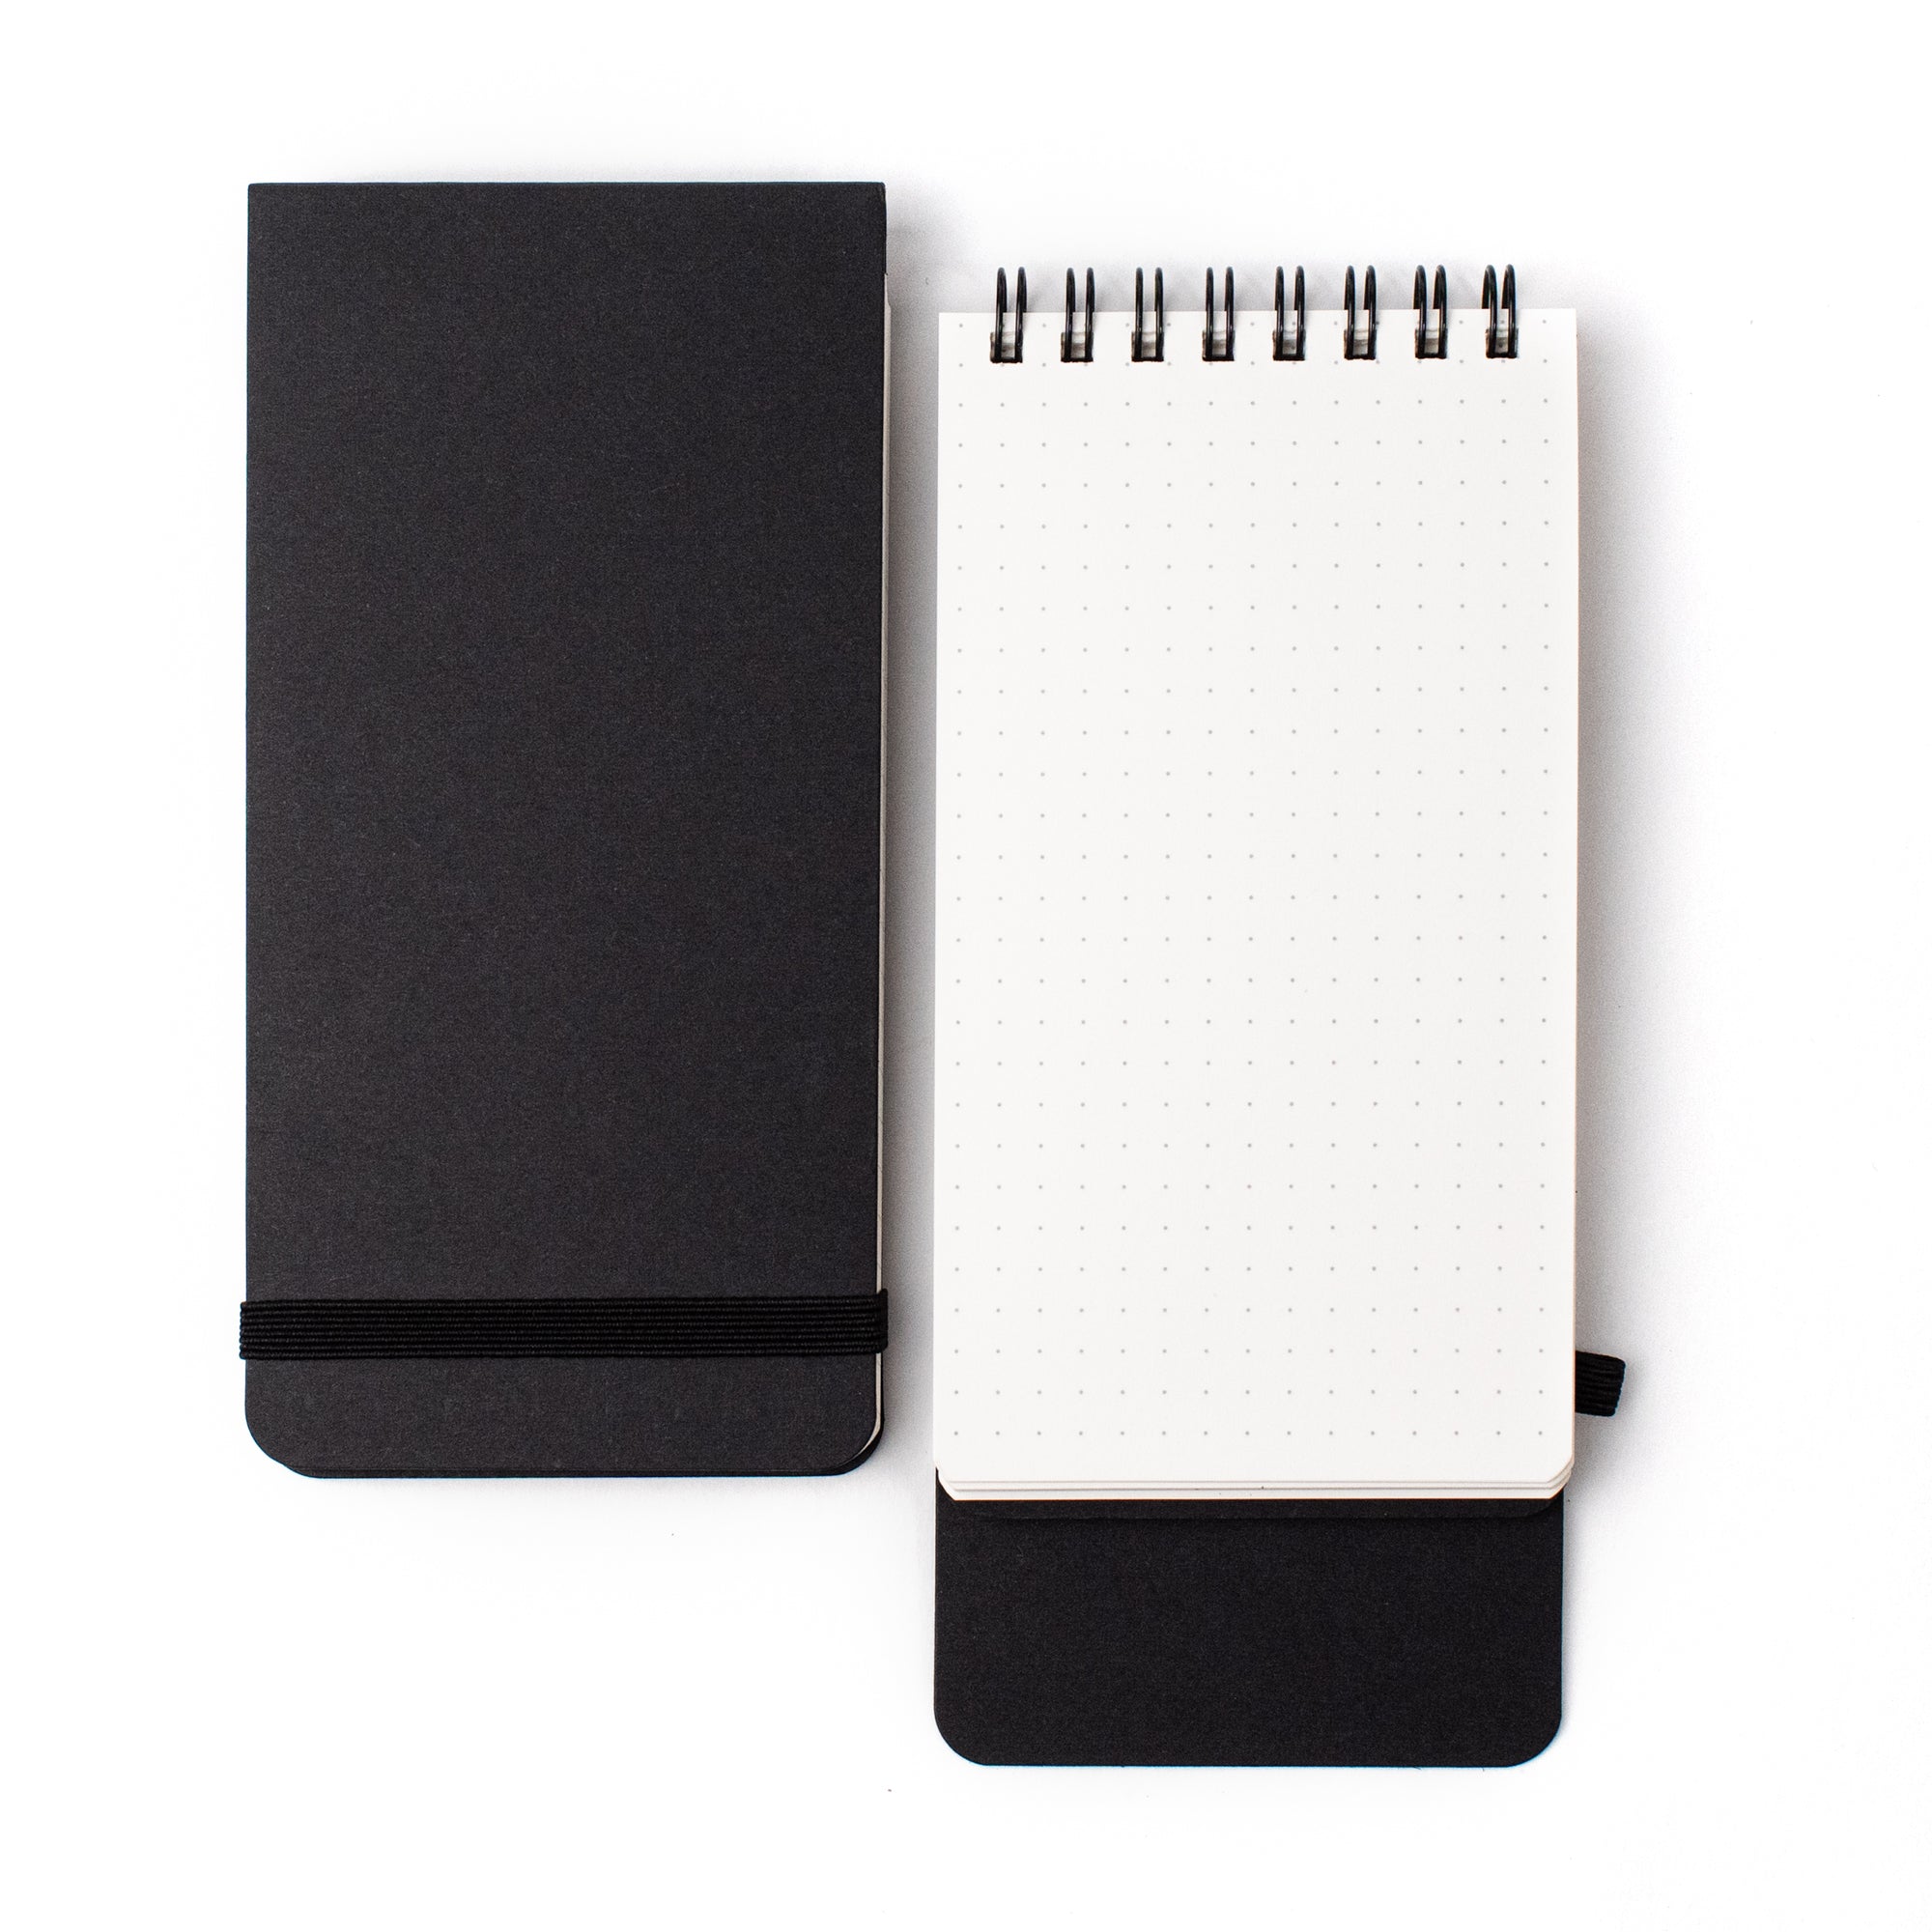 A Blackwing Reporter Pads (Set of 2) with a black cover, perfect for note-taking or sketching, set against a white background.